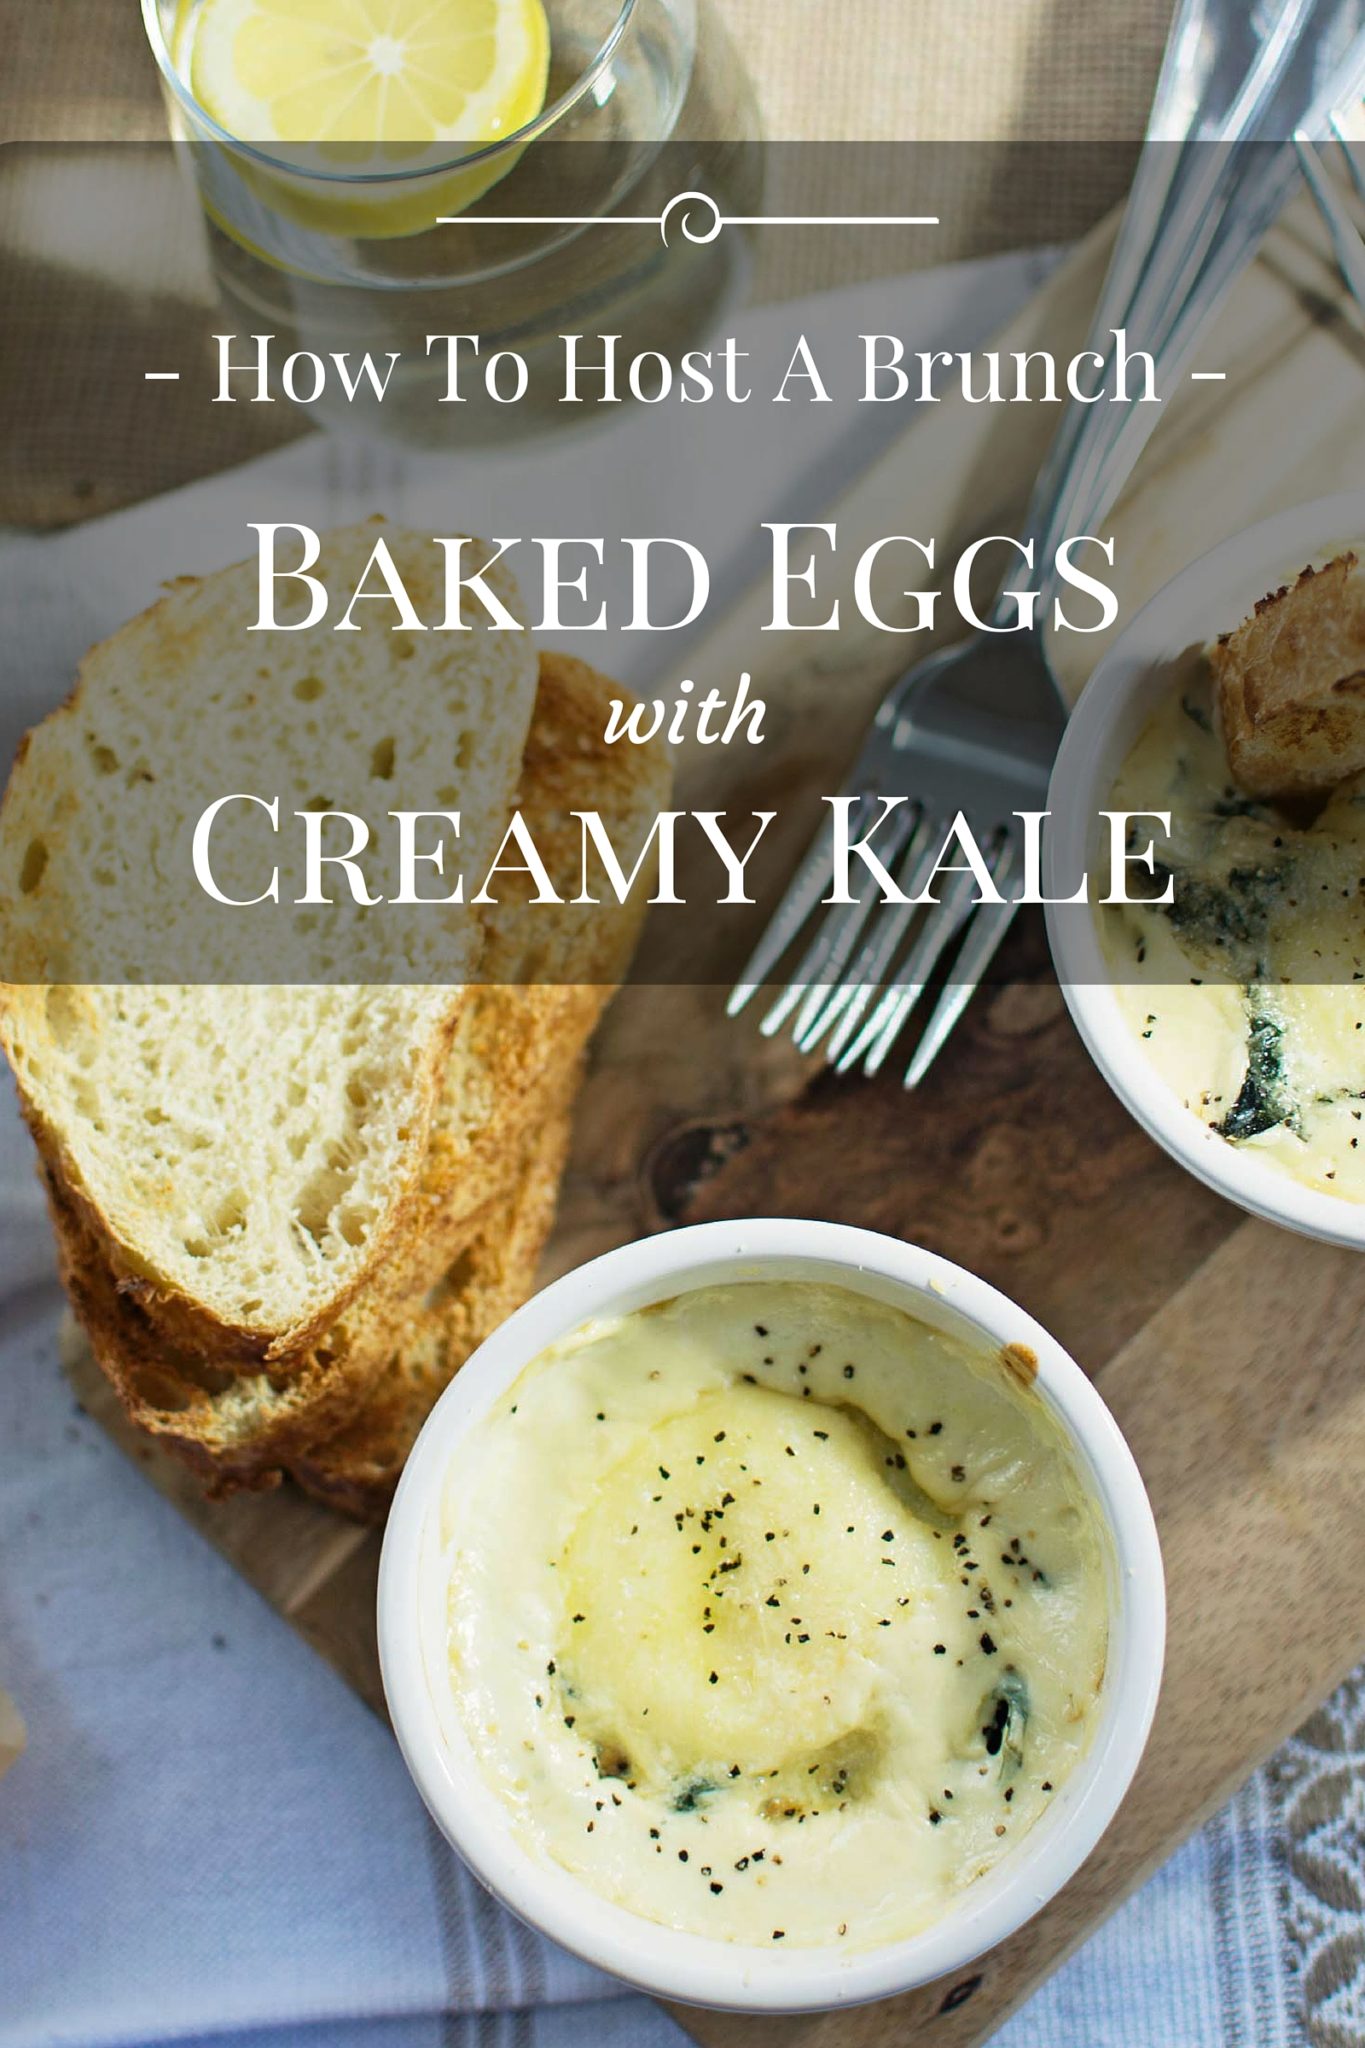 How To Host A Brunch - Baked Eggs with Creamy Kale - Find out more on @LittleFiggyFood